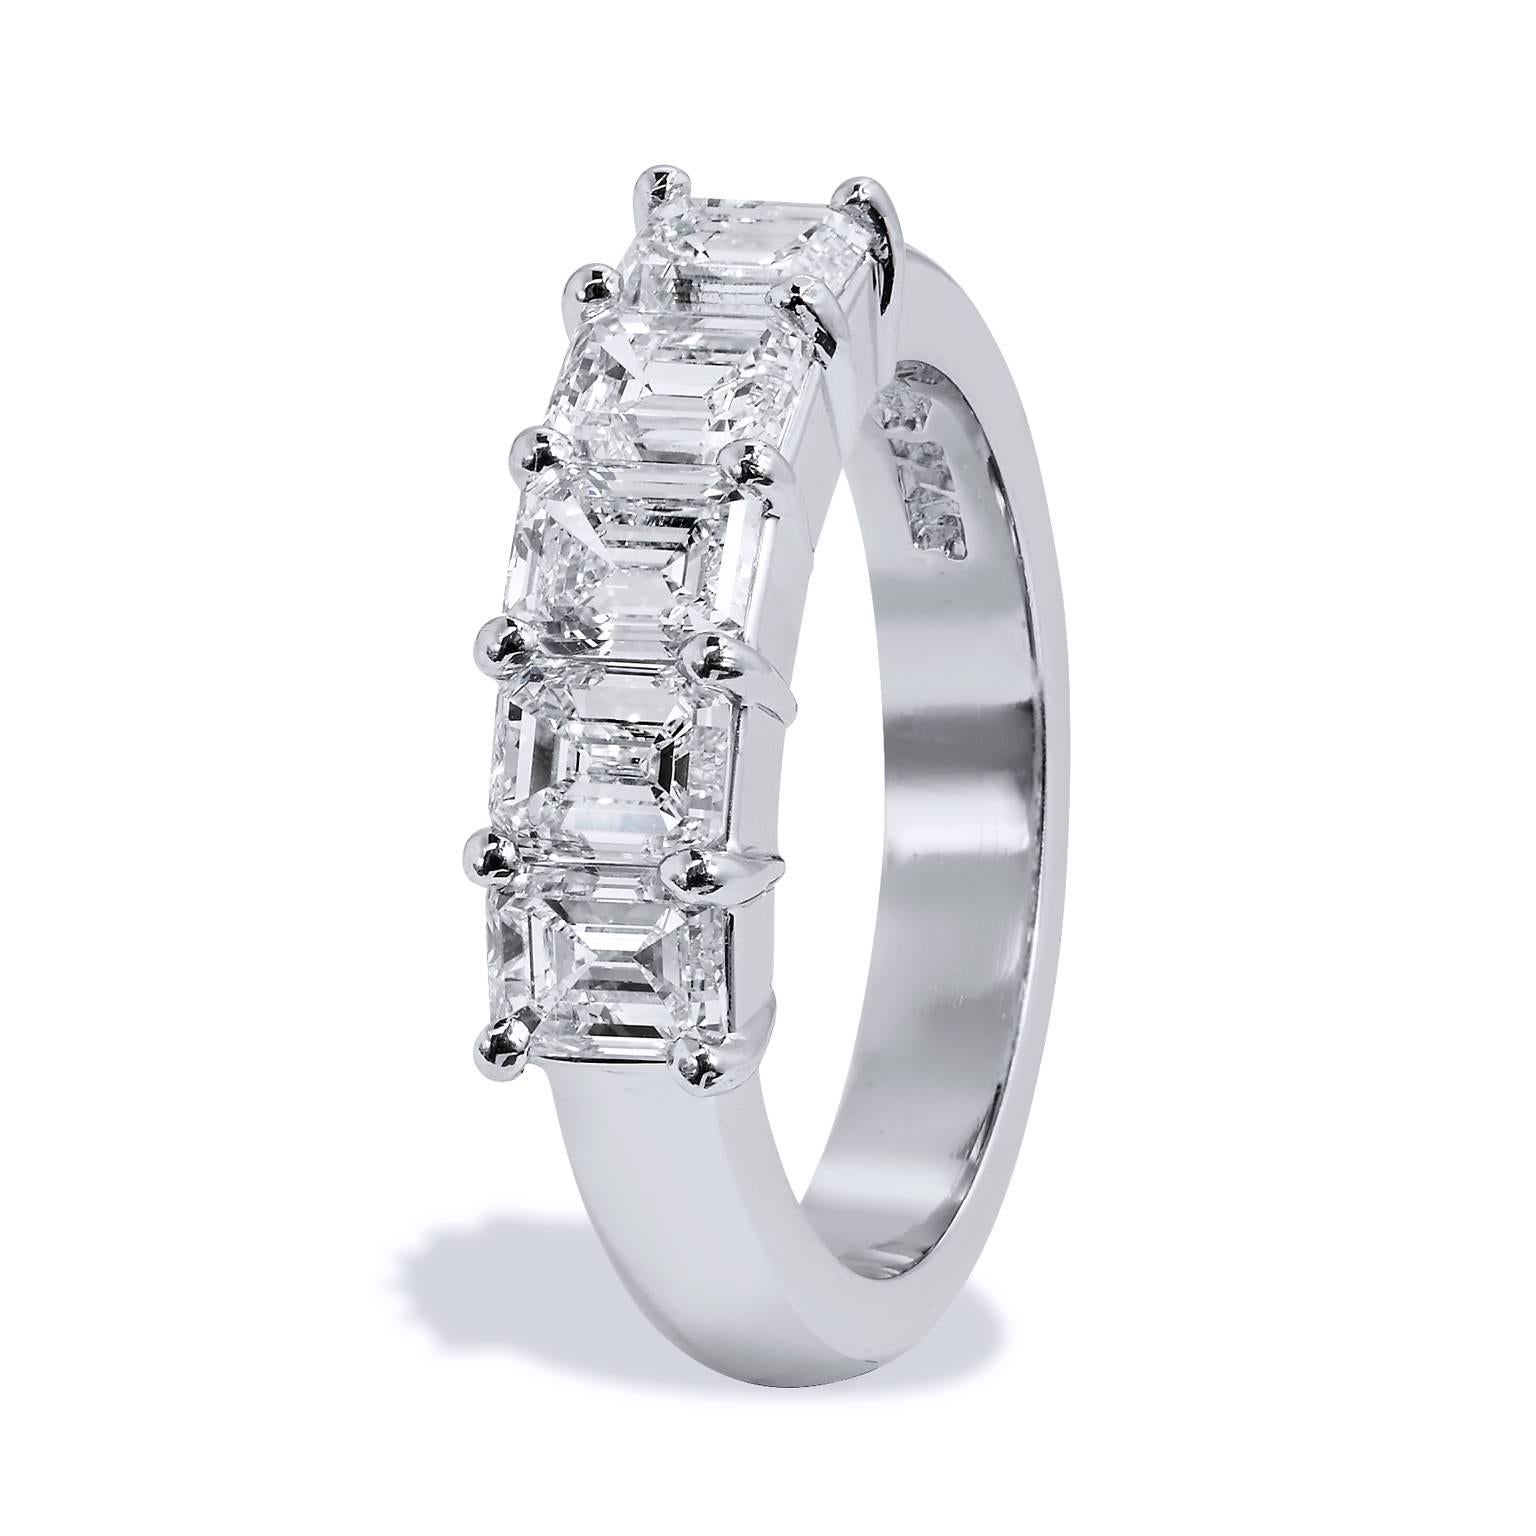 GIA Certified Five Emerald Cut Diamond Wedding Band Ring

This is a one of a kind, handmade ring by H&H Jewels. All 5 Emerald Cut Diamonds that make up this lovely ring, have been GIA Certified. 

(D/E/F/VS1; GIA#1152870567 #17099191/ #1152870450/